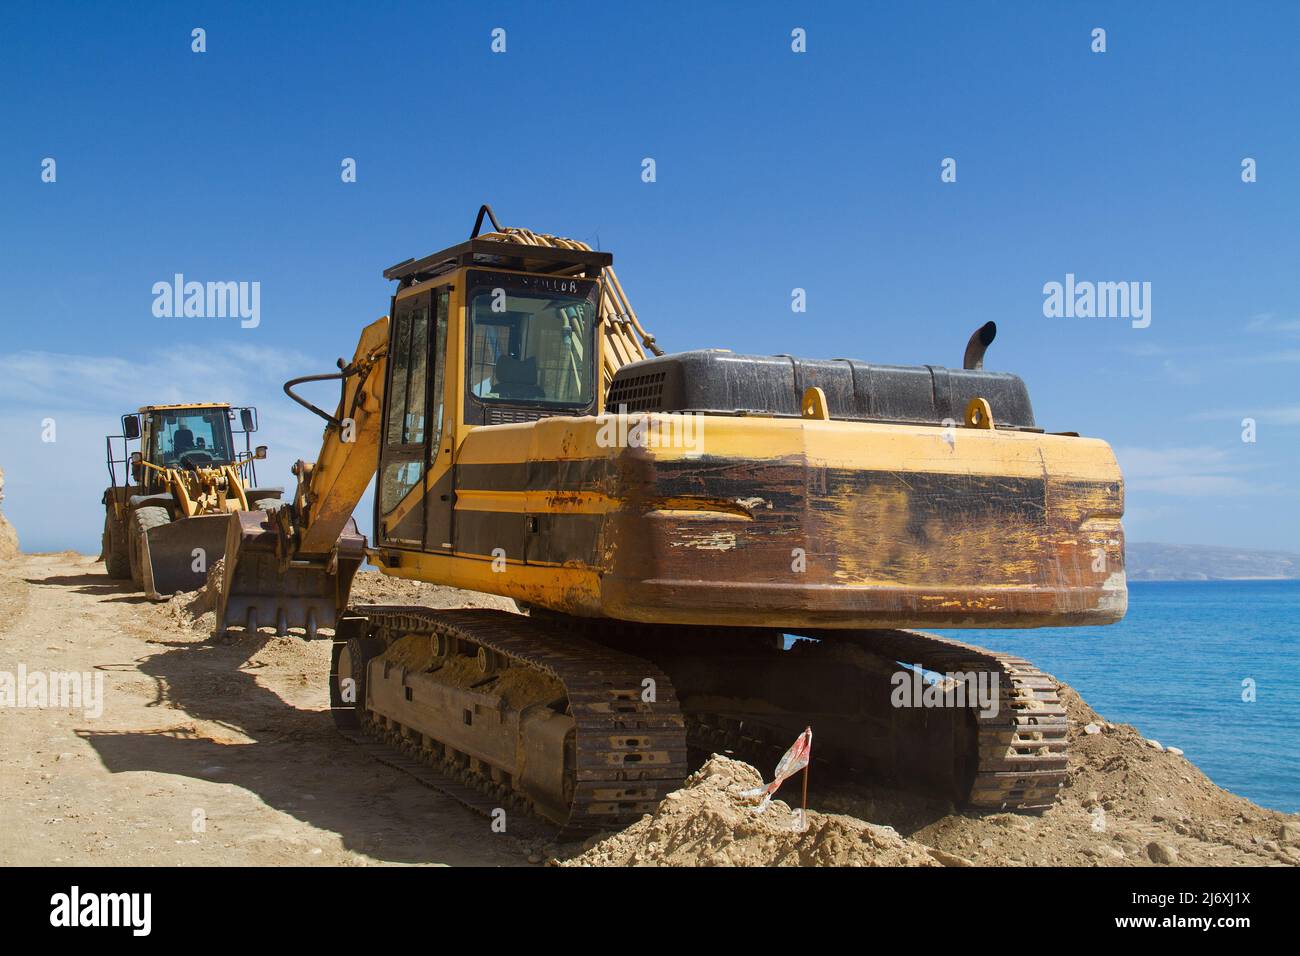 Yellow tracked excavator working on repairing a road in the mountains near the sea Stock Photo